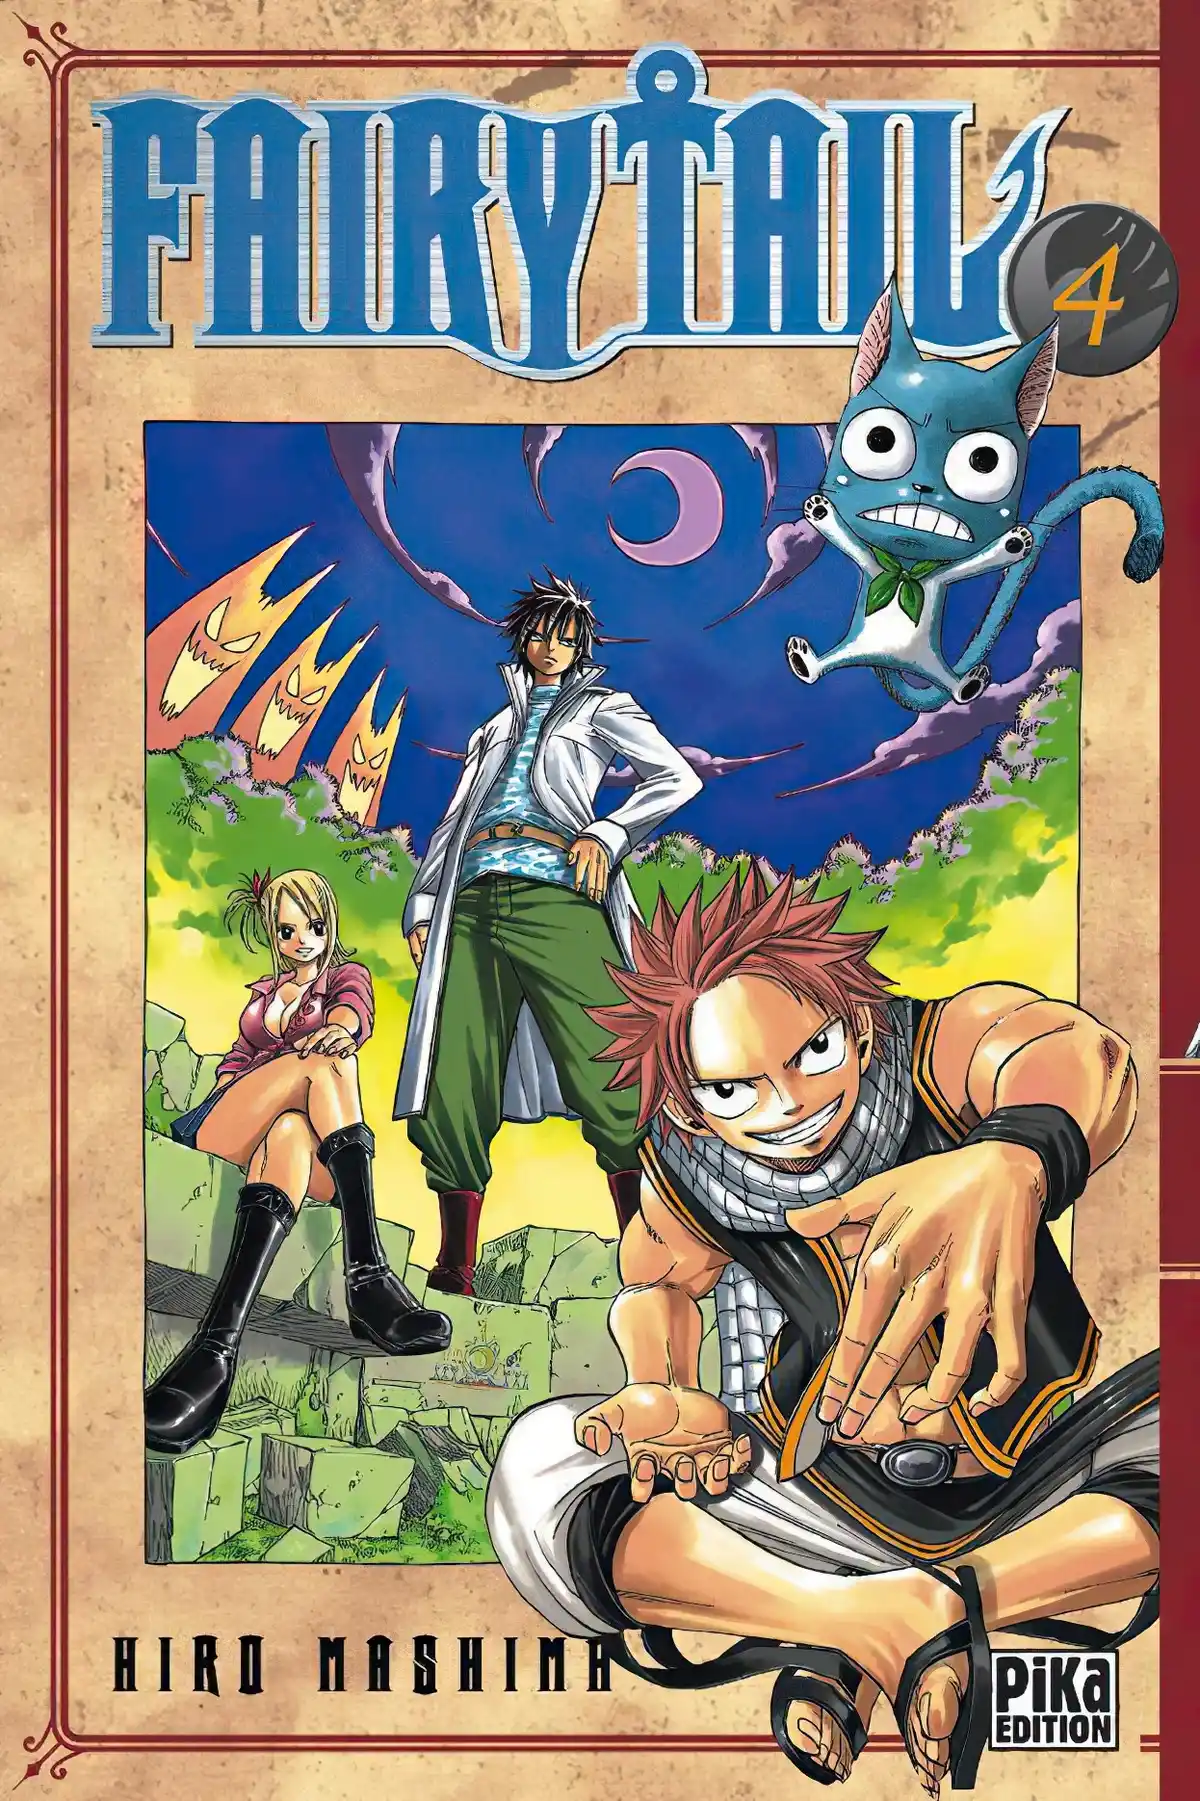 Fairy Tail Volume 4 page 1